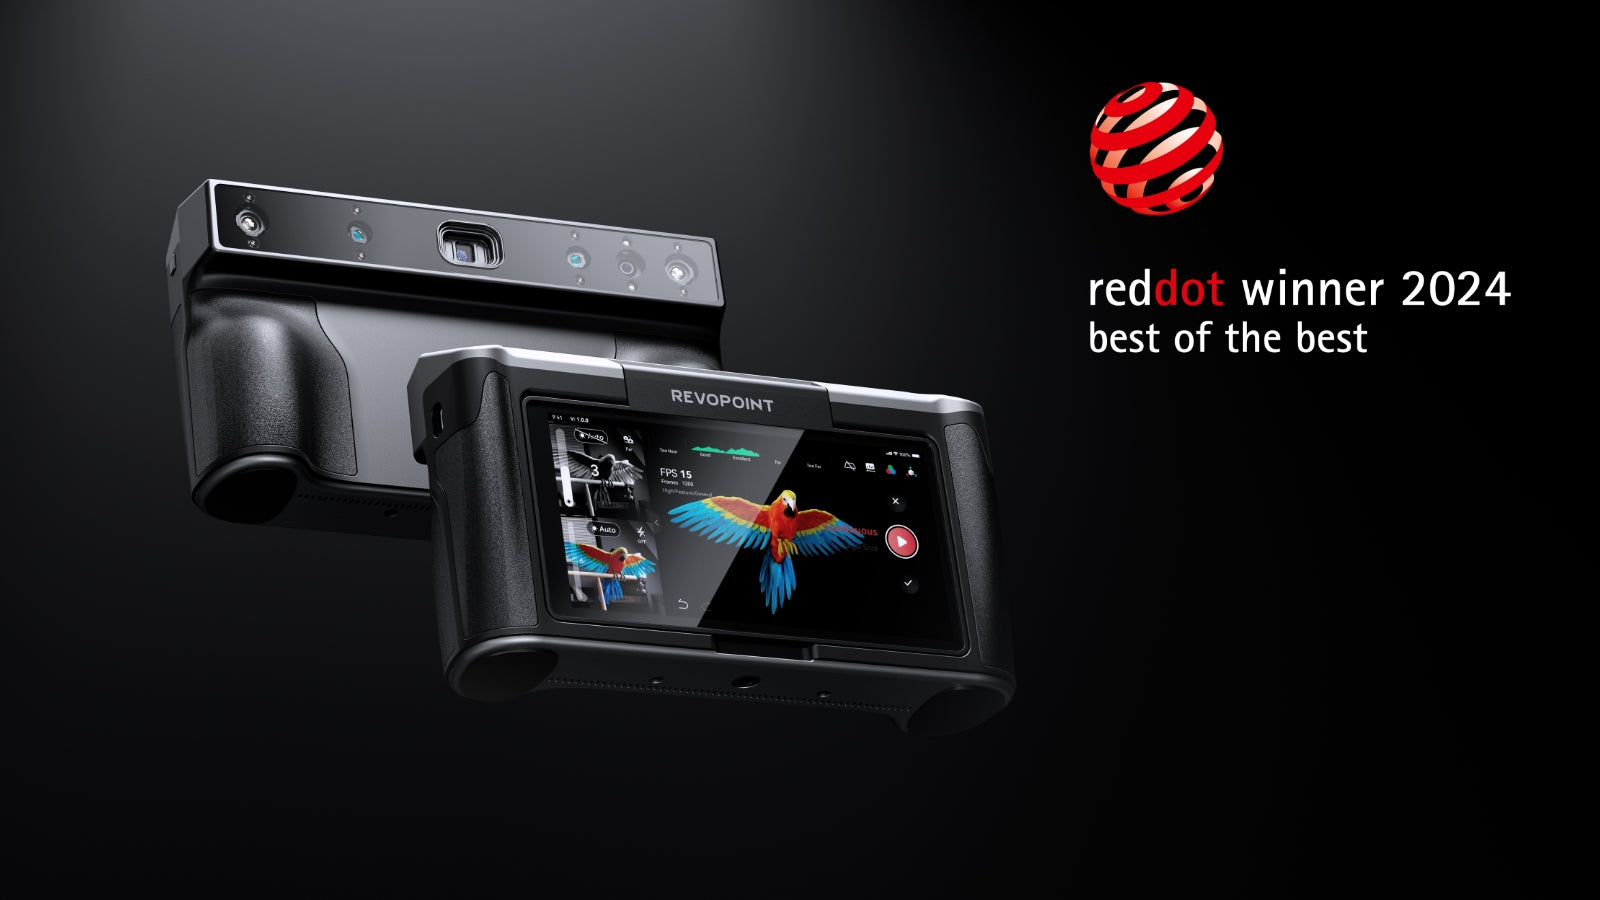 Revopoint MIRACO 3D Scanner Receives Red Dot: Best of the Best Award